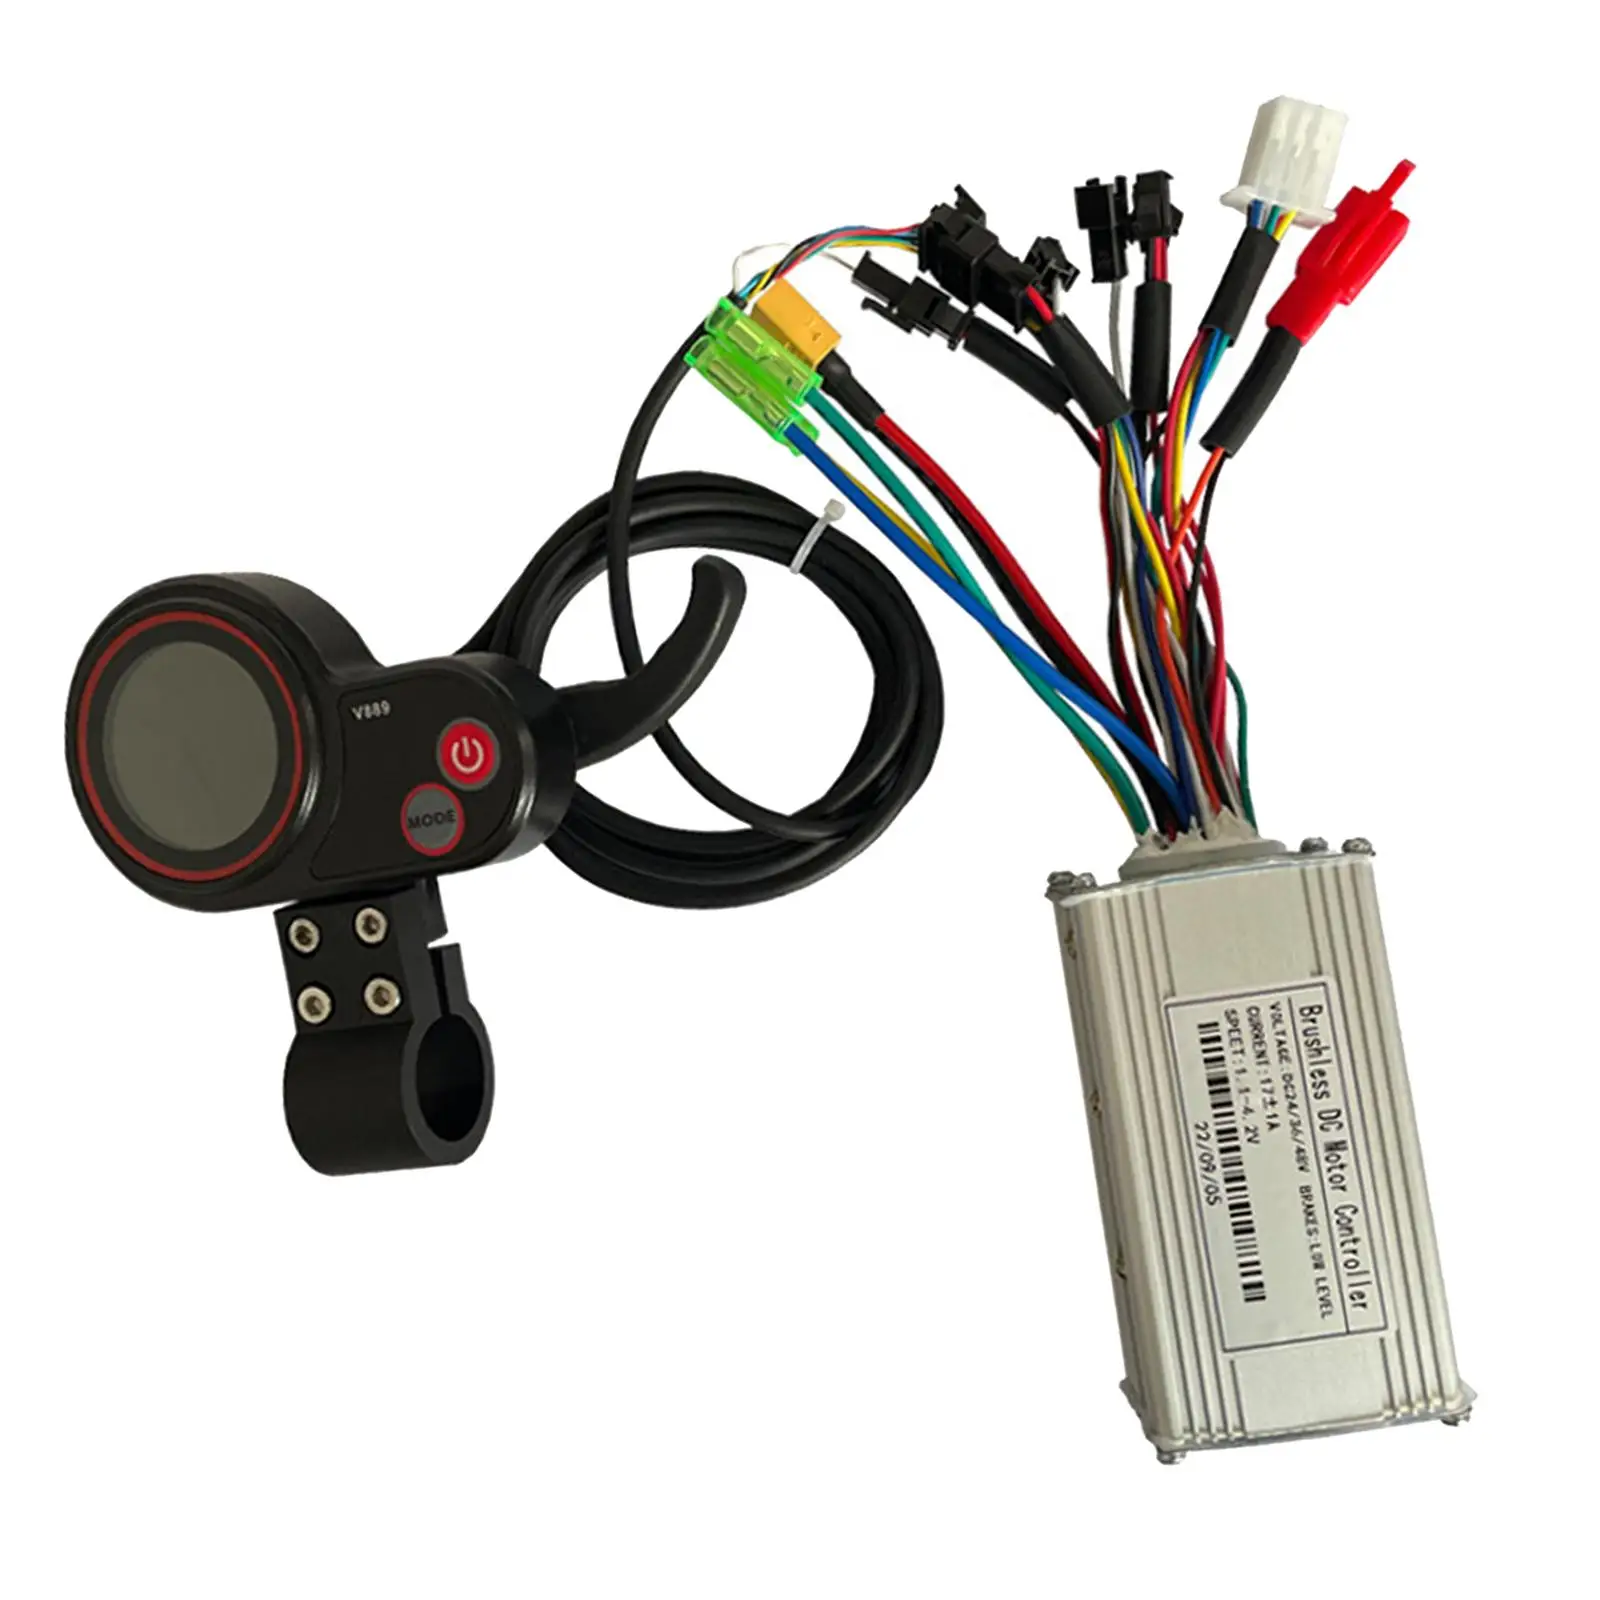 Electric Scooter Motor Brushless Controller LCD Panel Lightweight Sensitive Control Brushless DC Controller for Scooter Bike